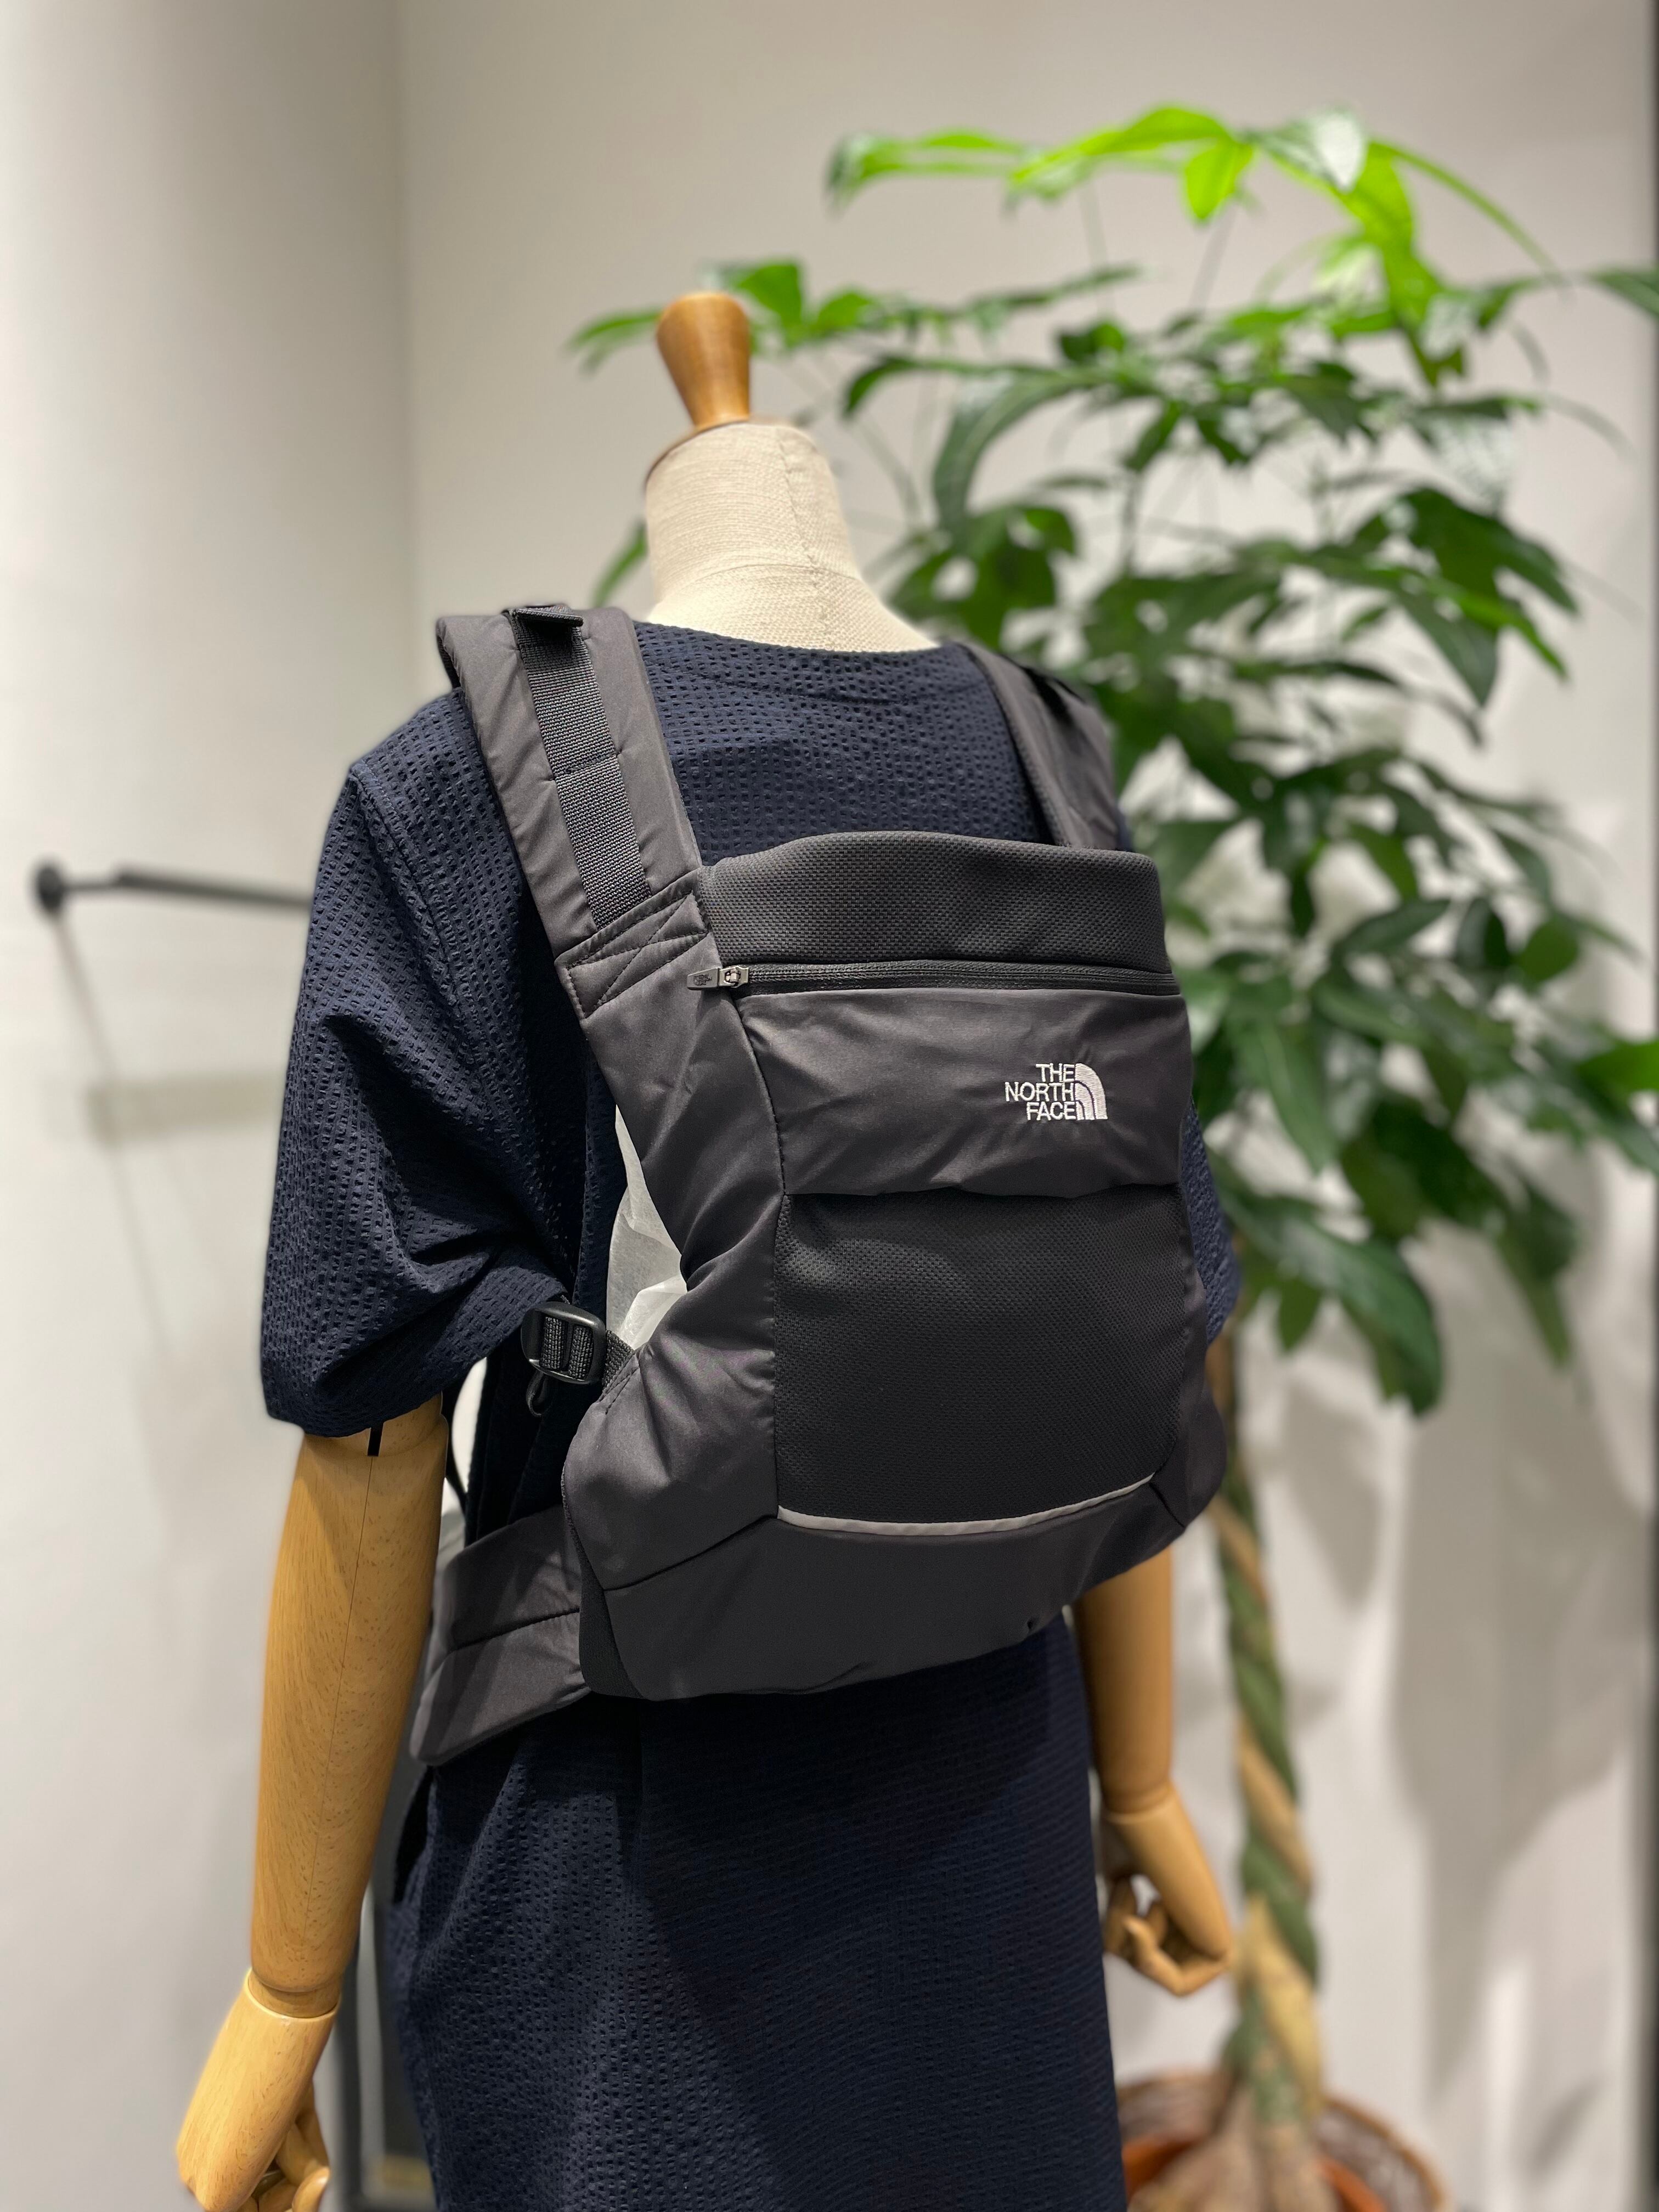 THE NORTH FACE/Baby Compact Carrier(ベビーコンパクトキャリア